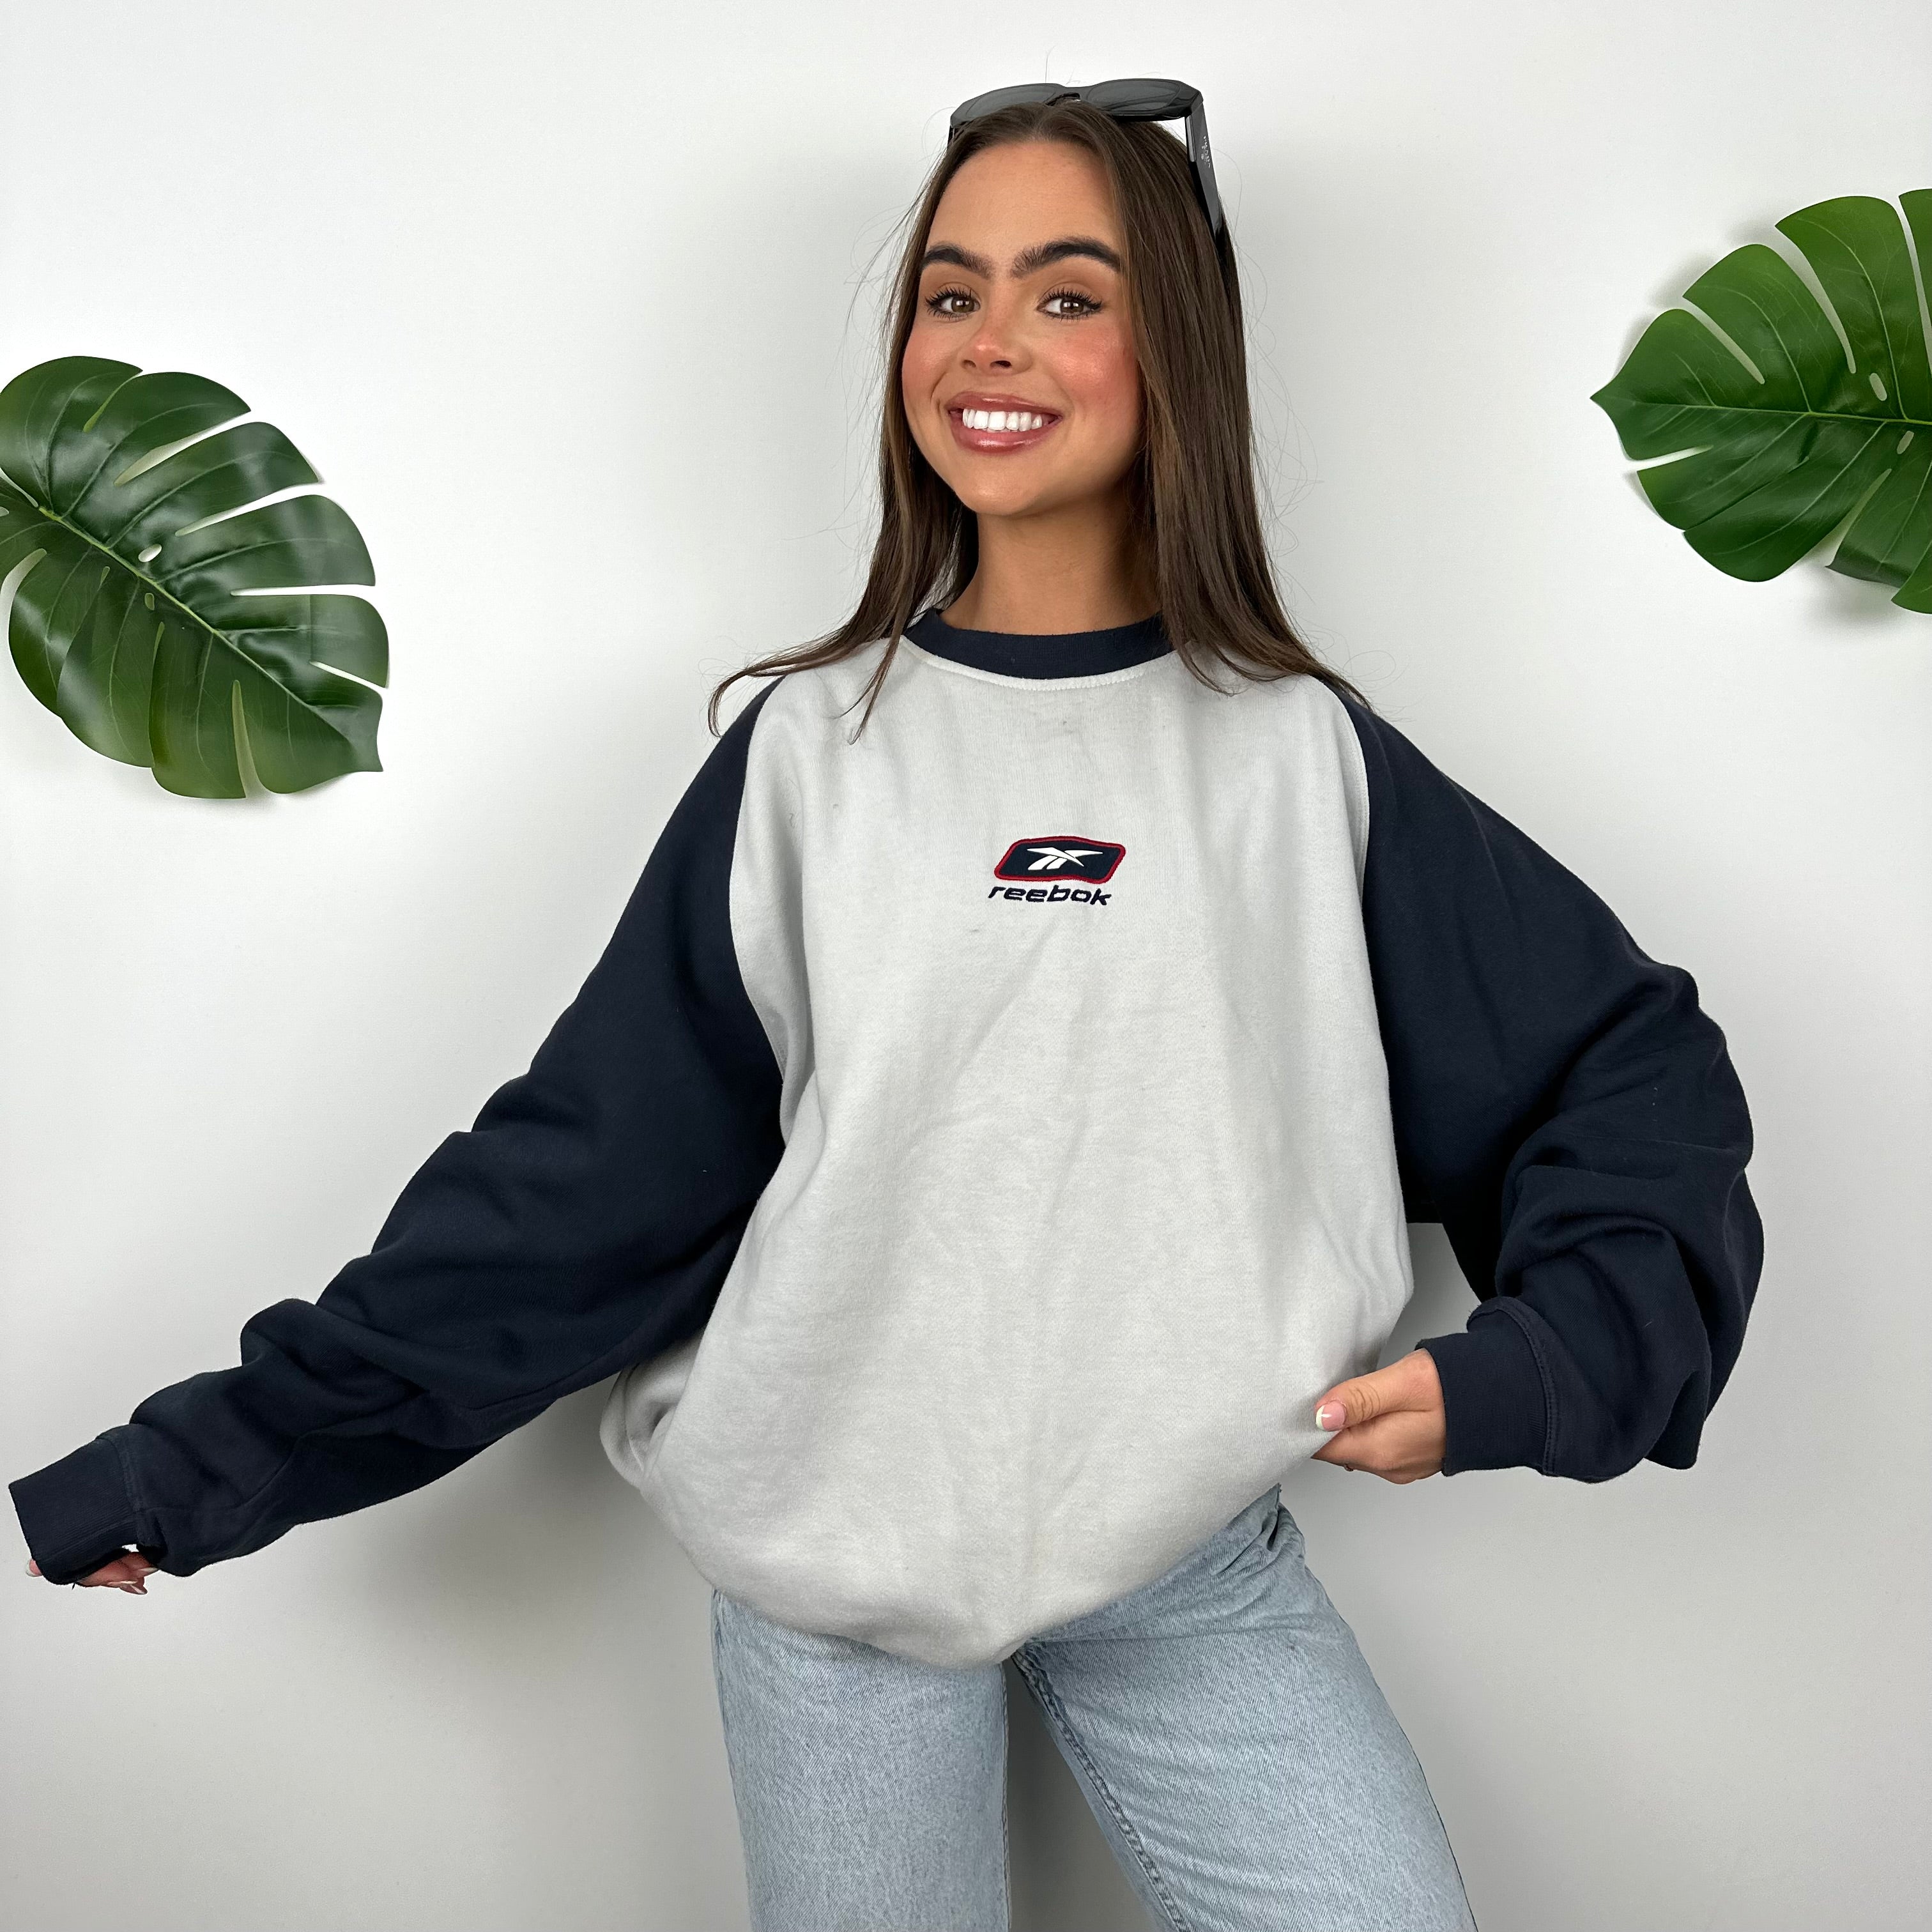 Reebok Grey & Navy Embroidered Spell Out Sweatshirt (L)